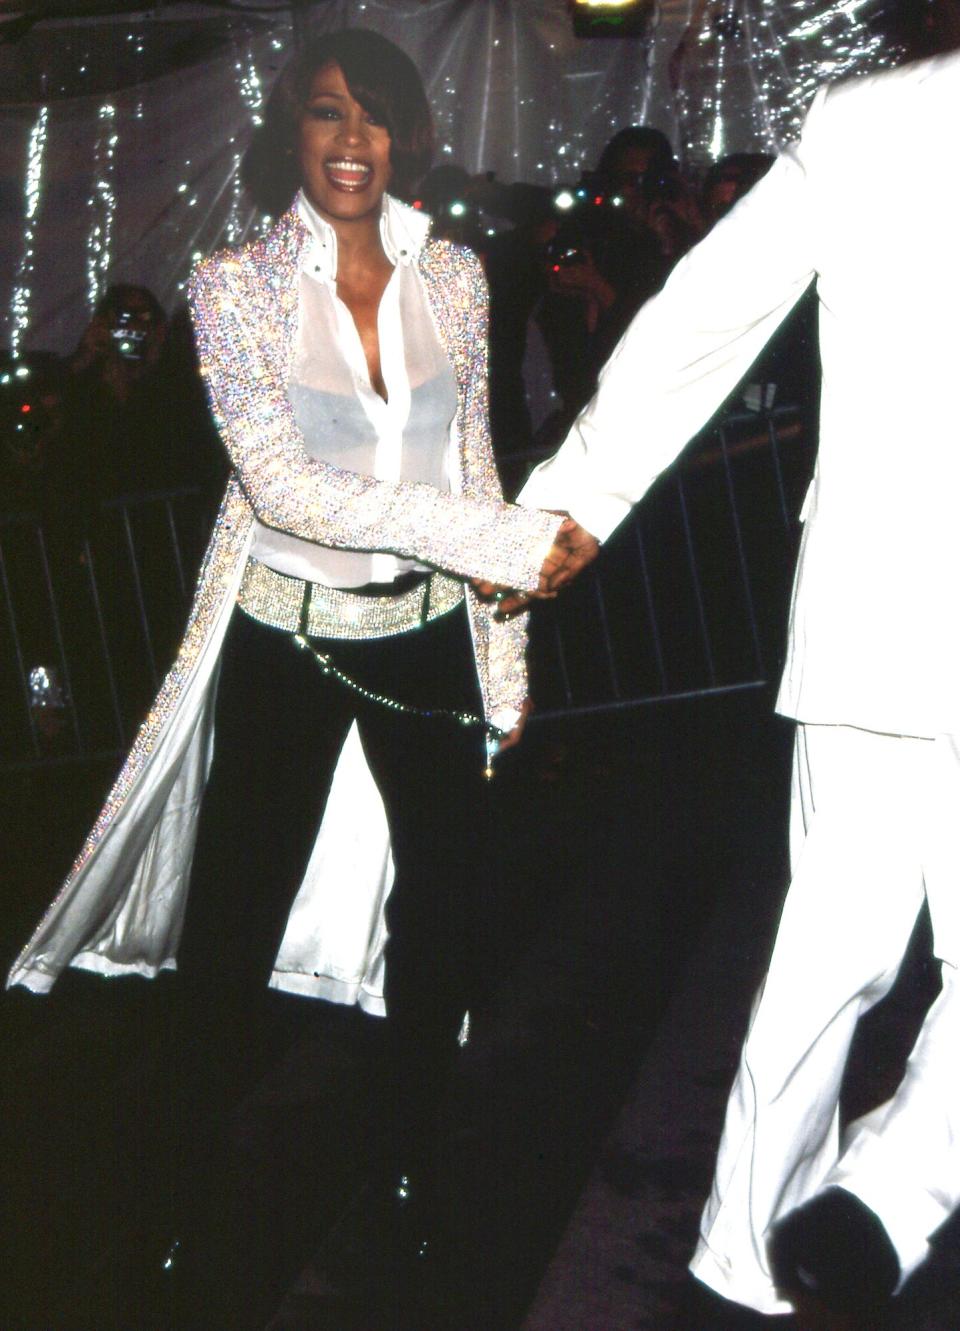 Whitney Houston walks down the red carpet at the 1999 Met Gala, grasping the hand of a man in a white suit. Houston is wearing black pants, a sheer white top, and sparkling duster jacket.